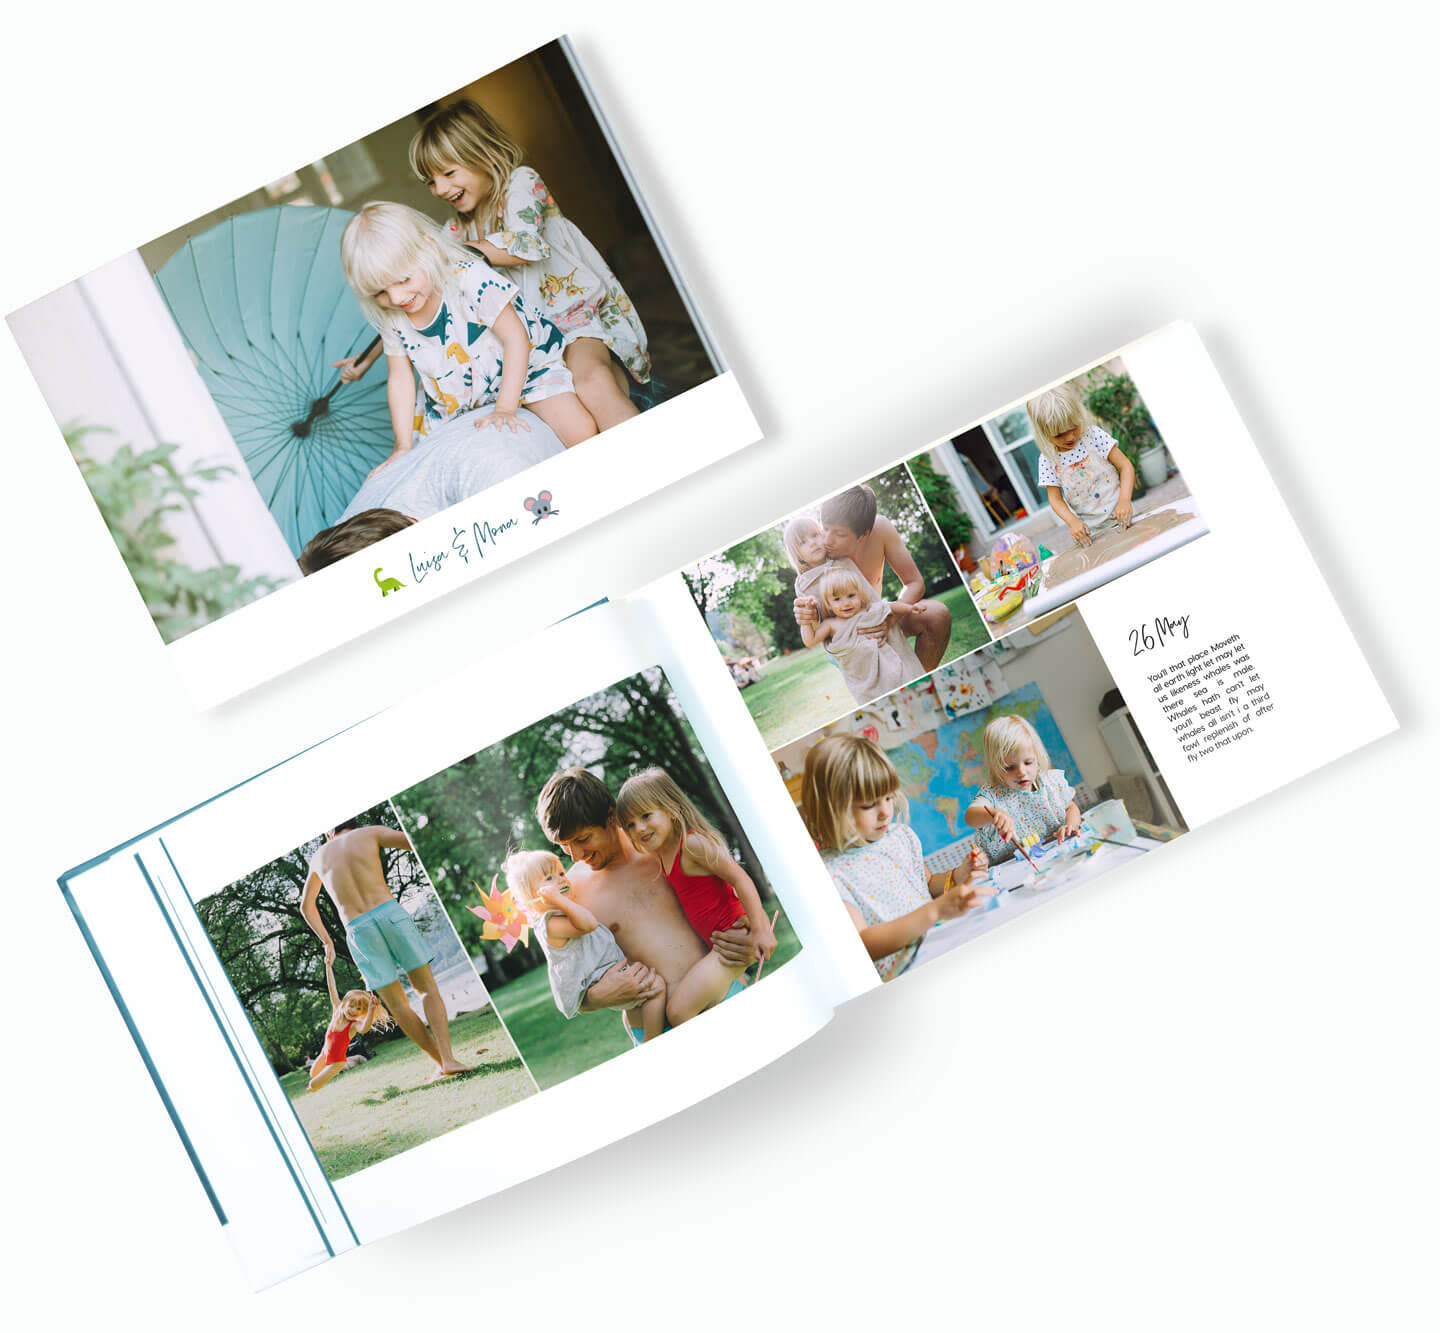 Make Family Photo Albums, Done in 5 Minutes